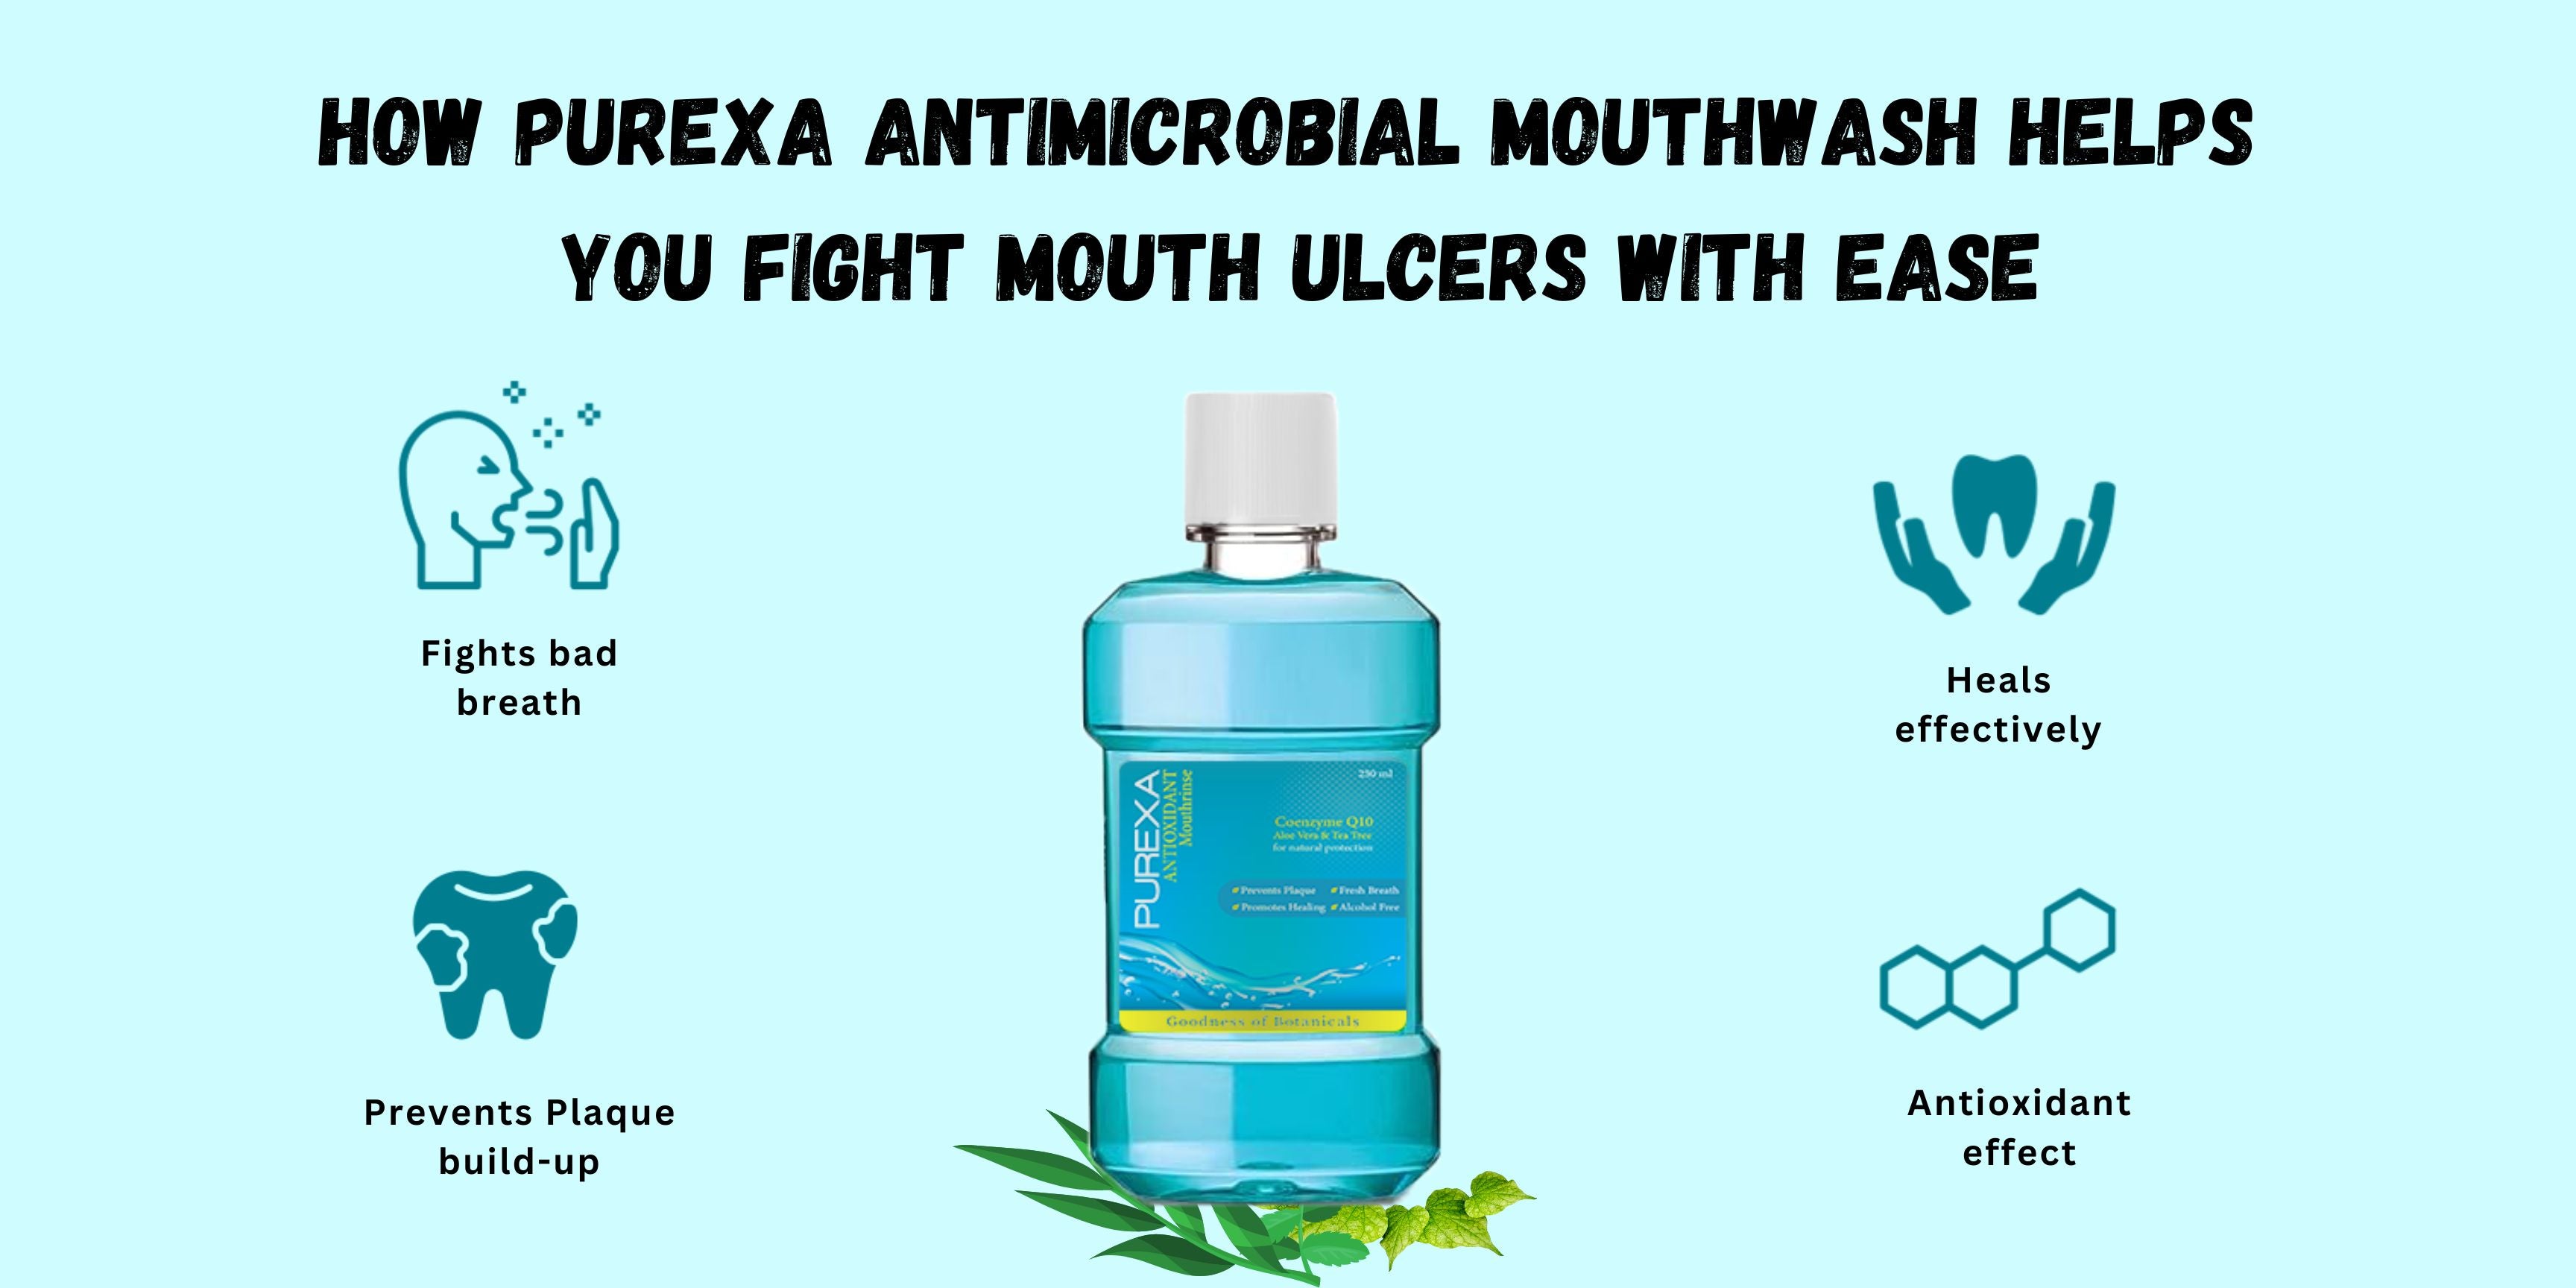 How antimicrobial mouthwash helps you fight mouth ulcers with ease